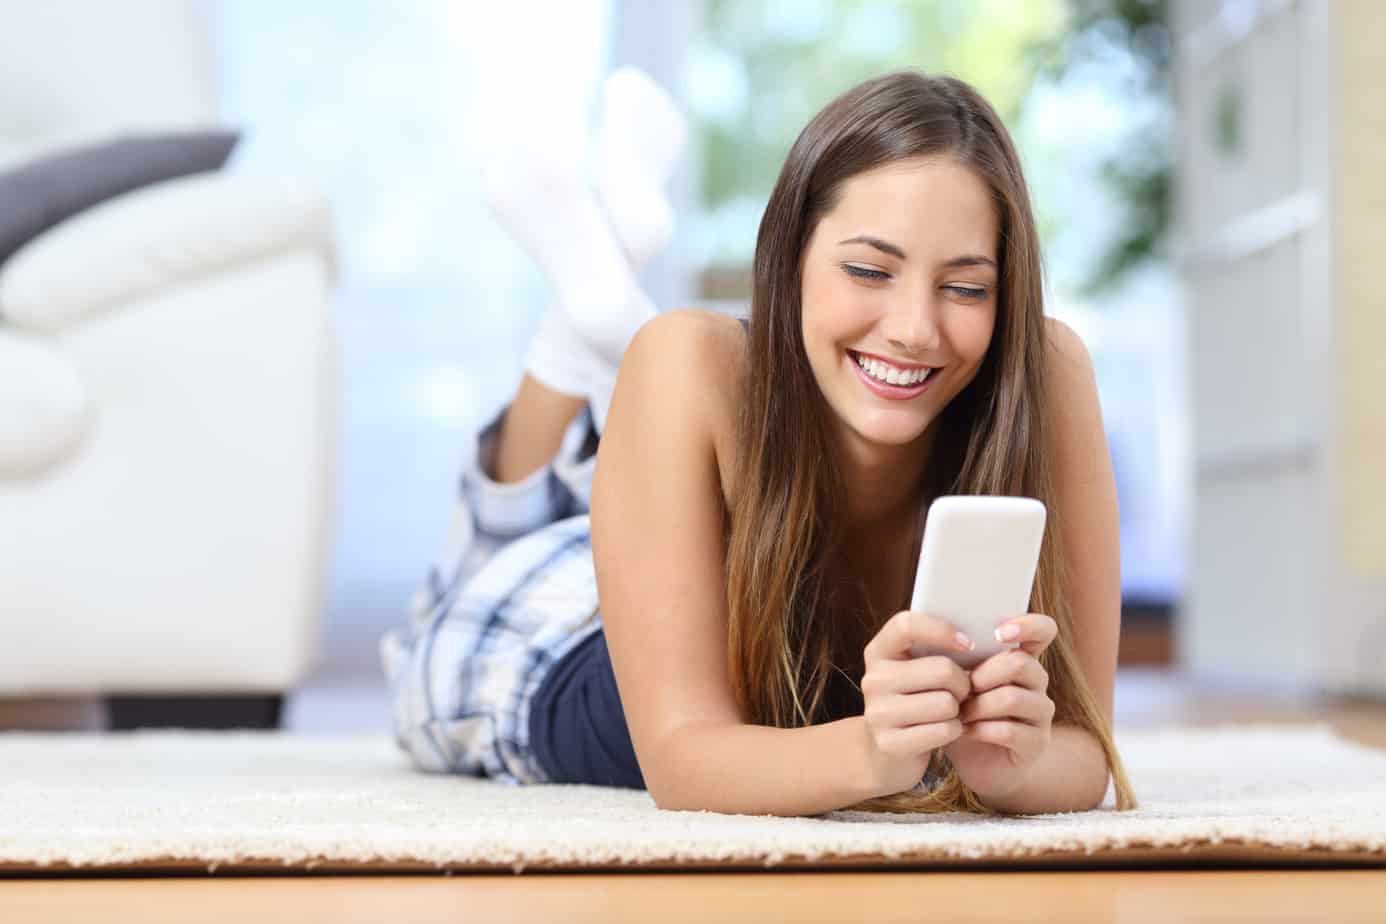 Questions over text flirty to ask Top Flirty